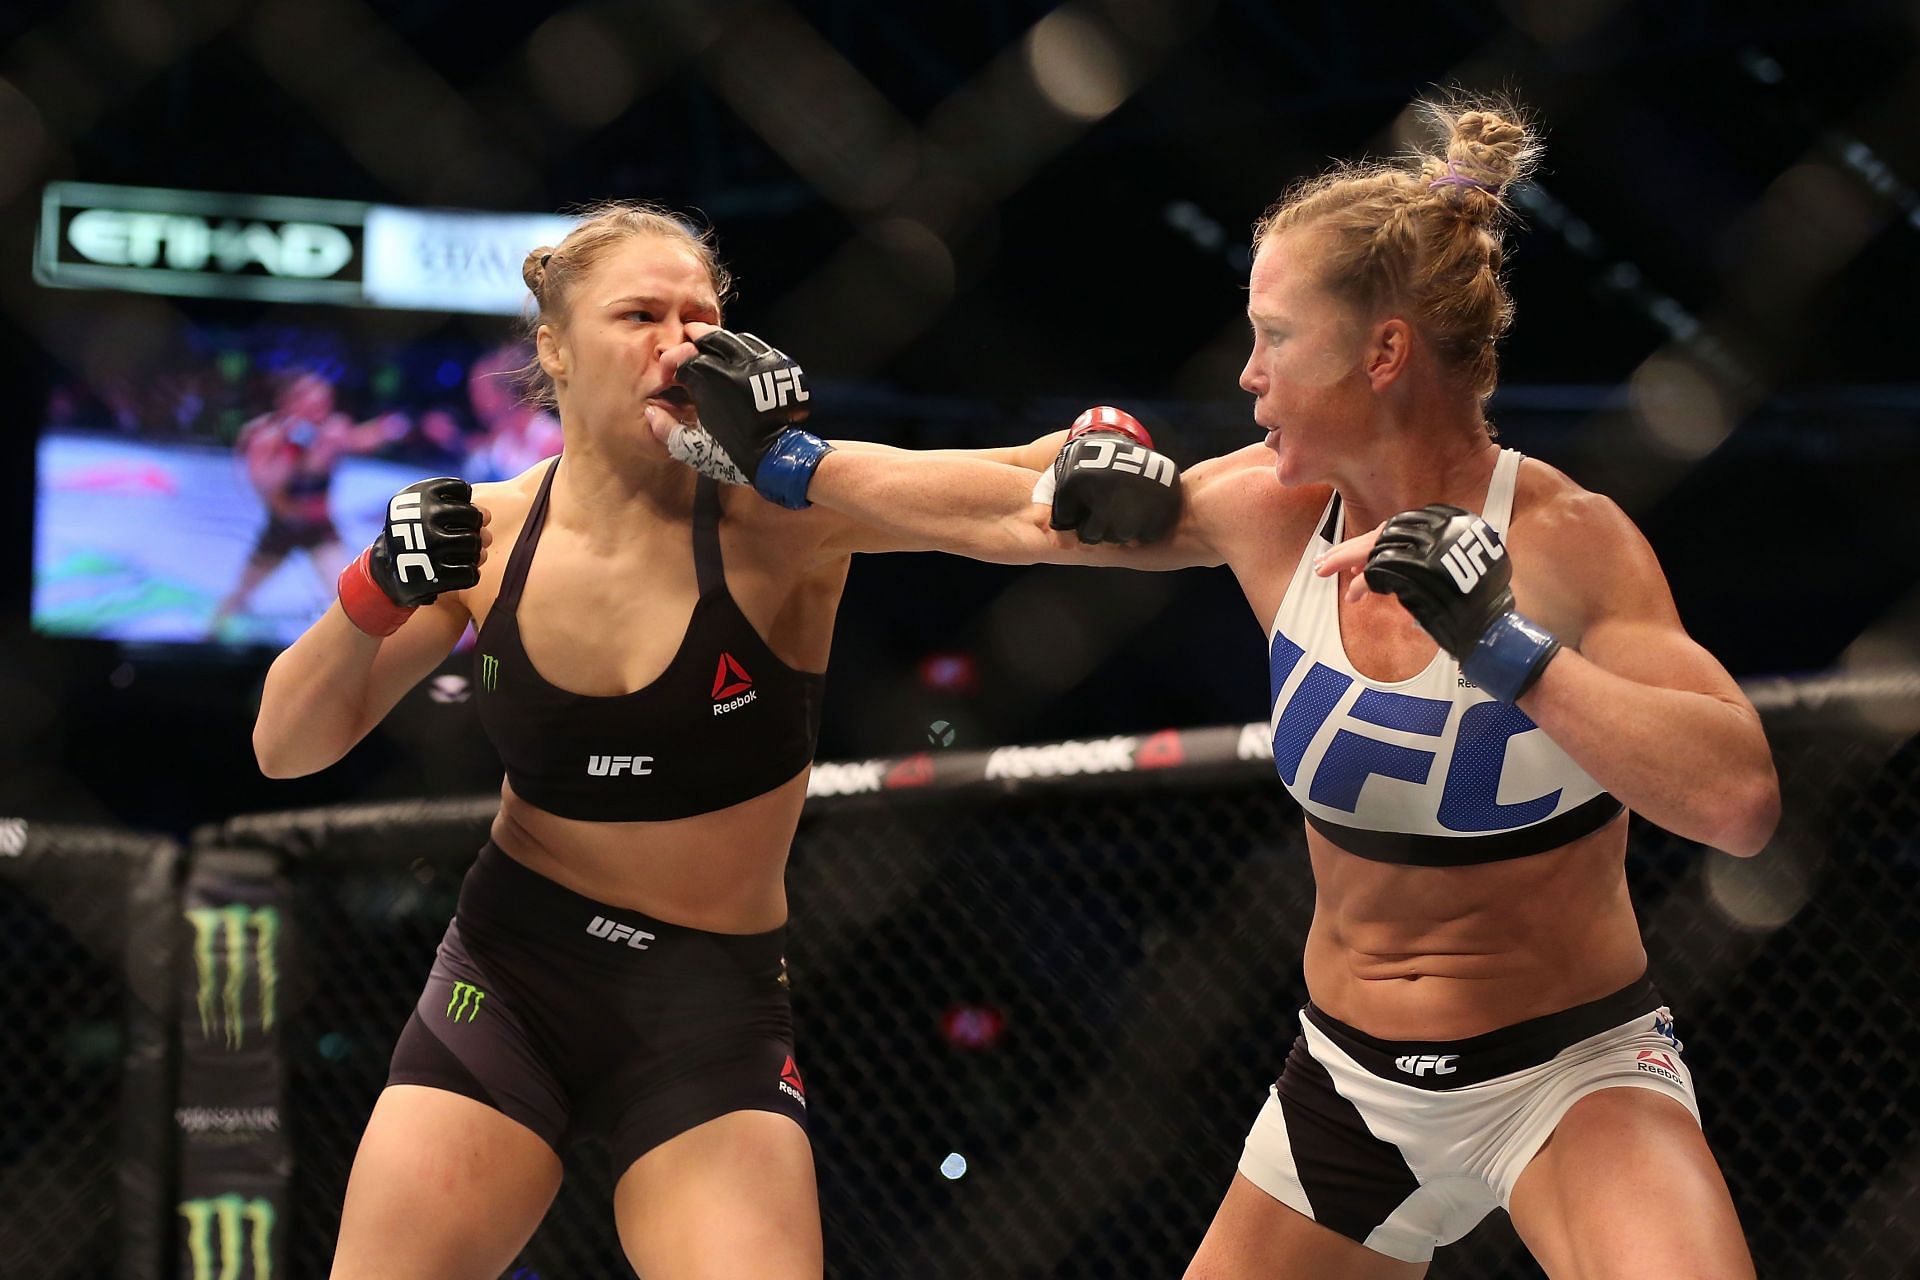 Ronda Rousey got overwhelmed by Holly Holm&#039;s striking prowess